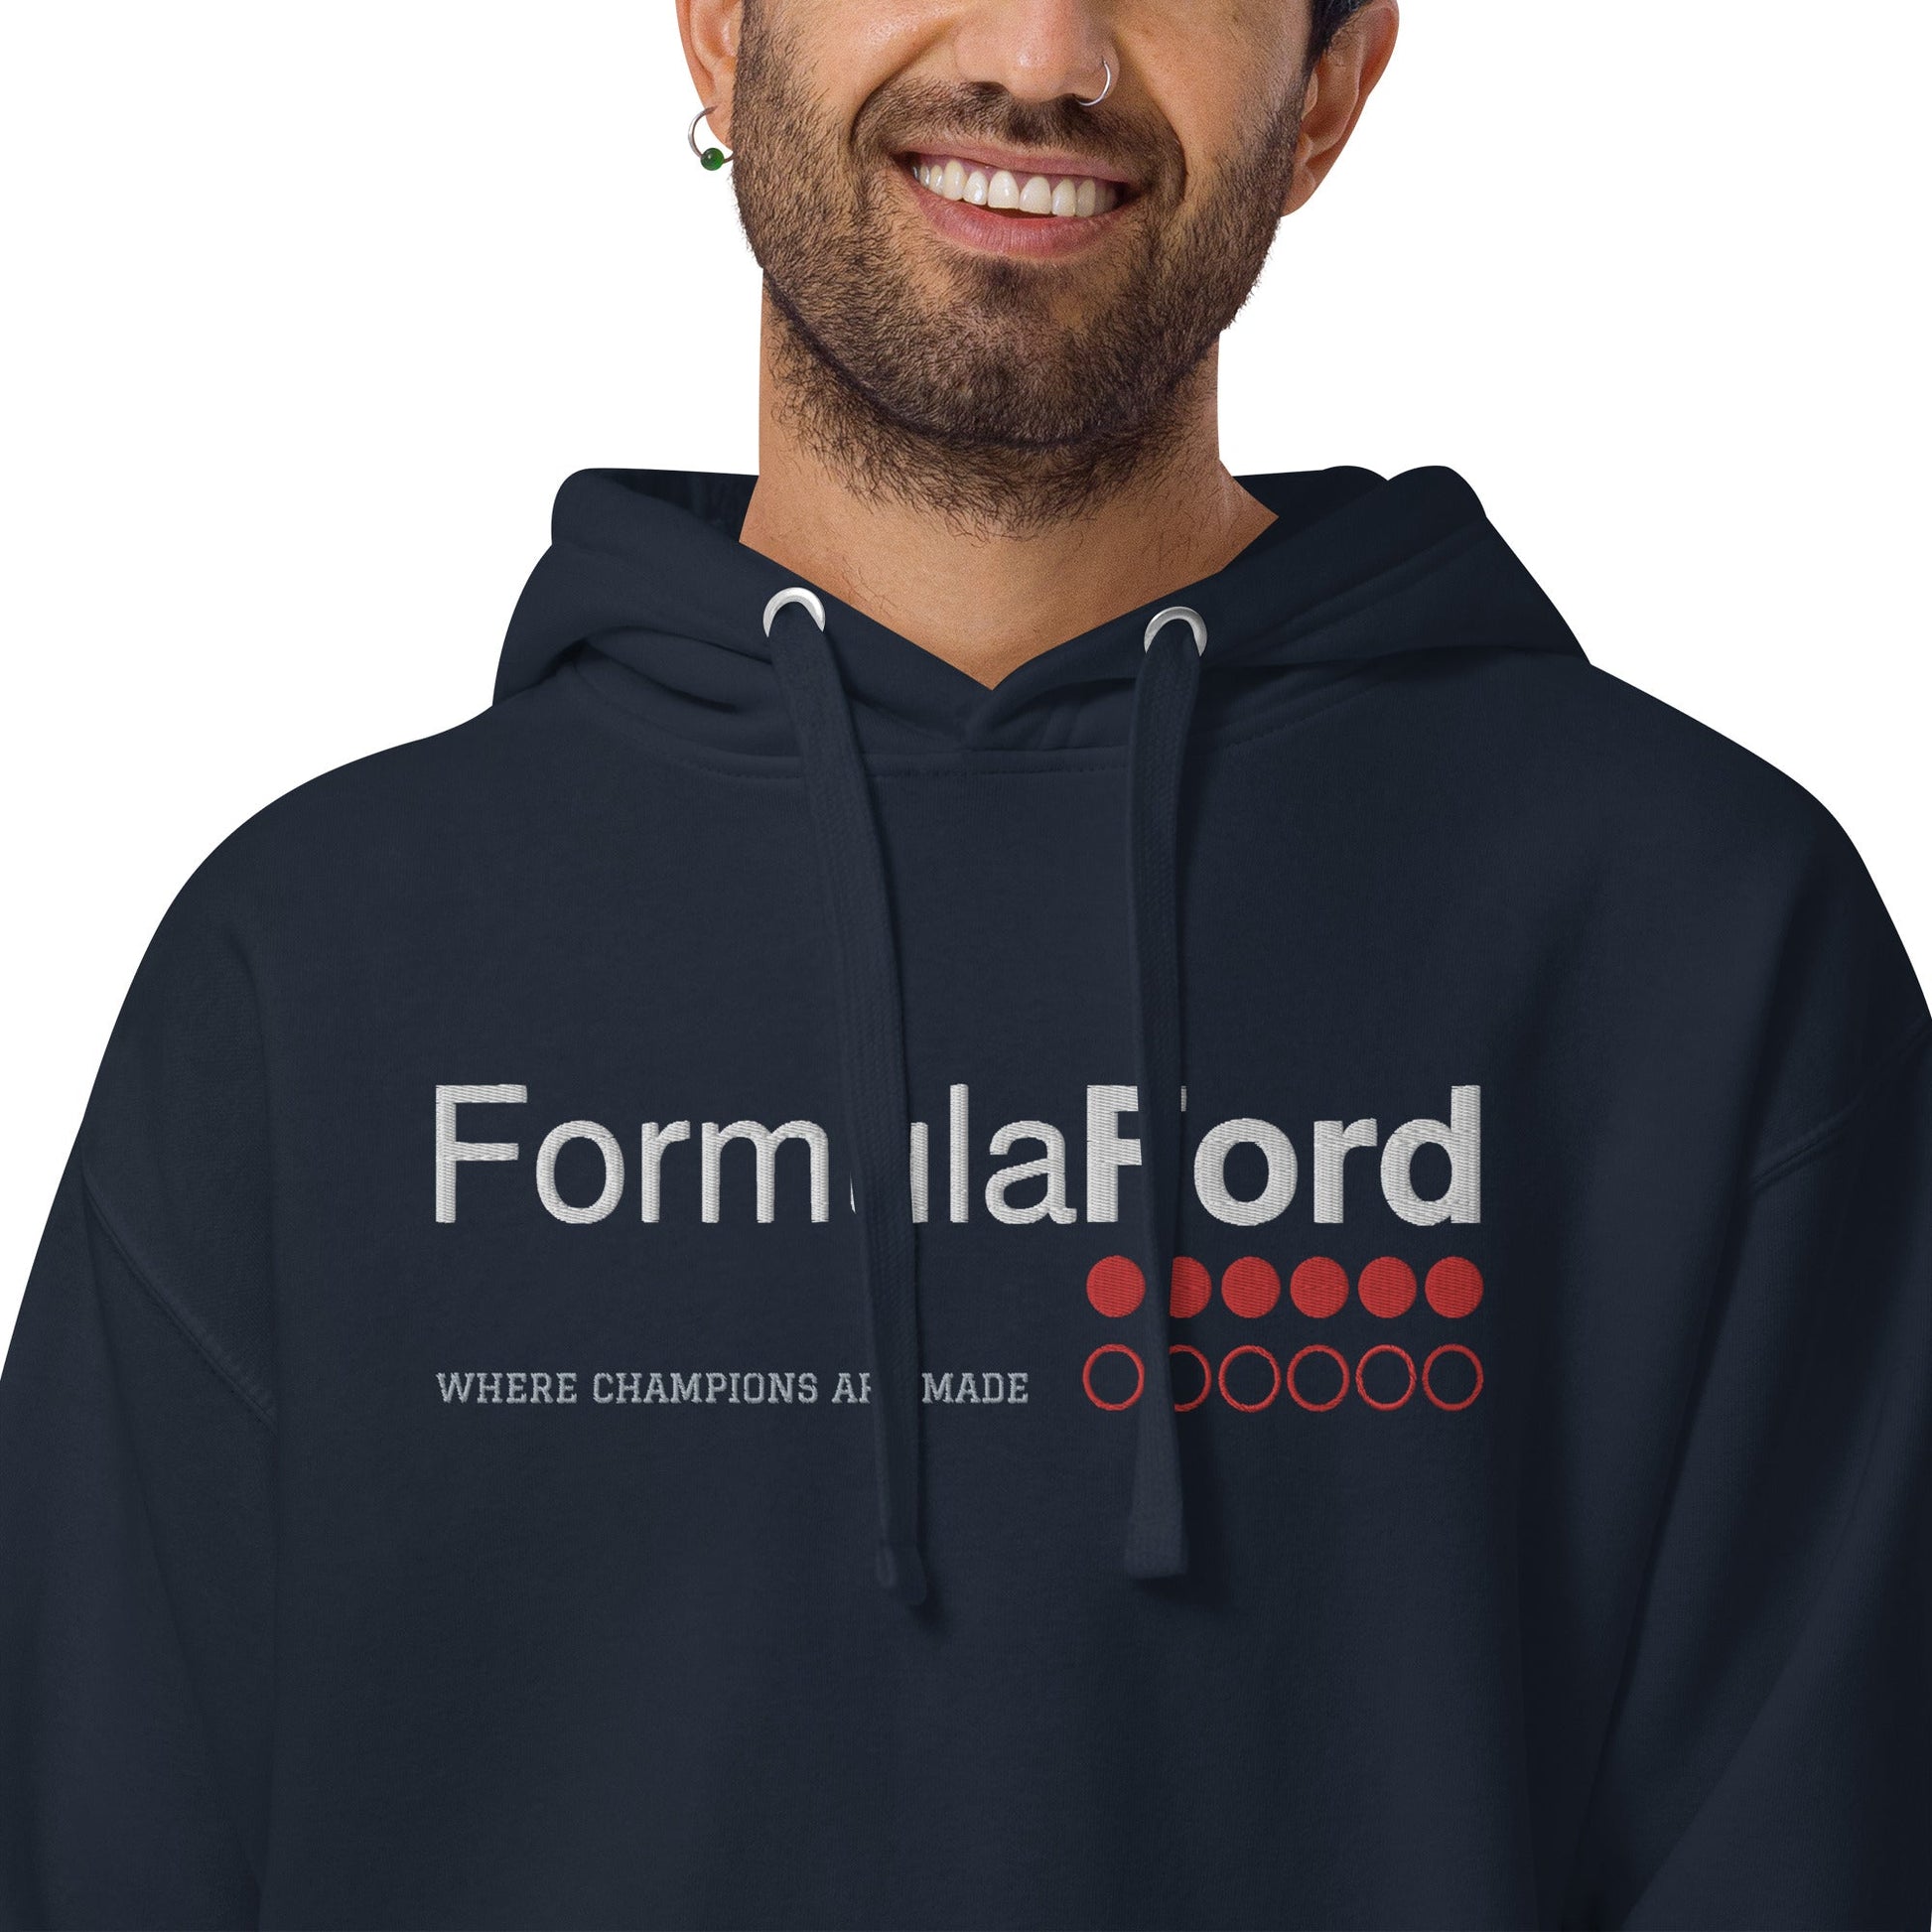 FORMULA FORD Embroidered Fleece Hoodie